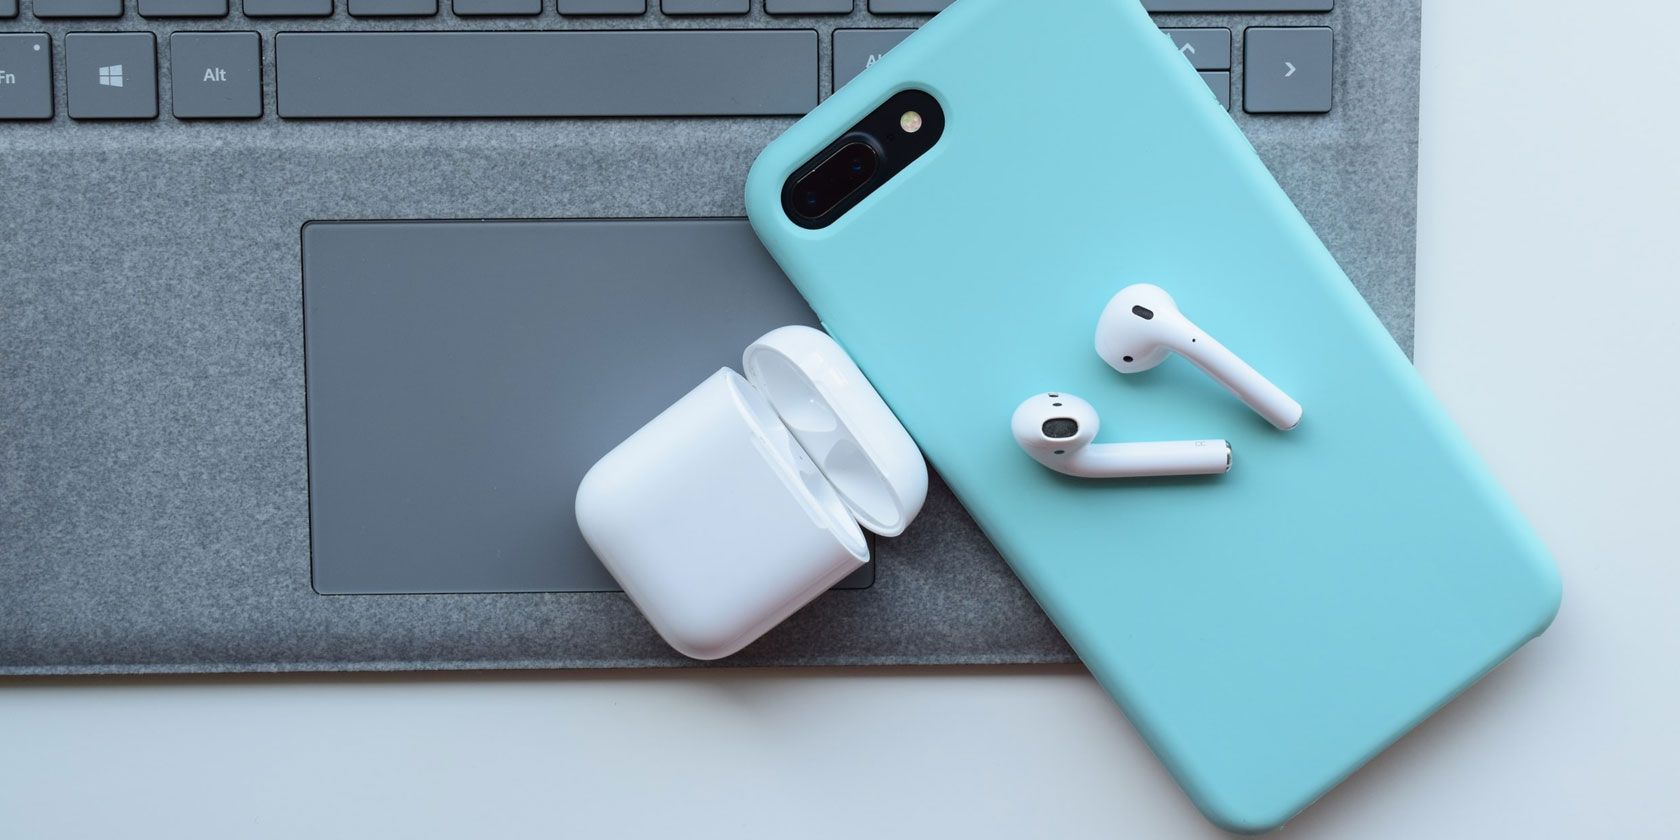 How to Connect AirPods to Your MacBook, iPhone, PC, or Android